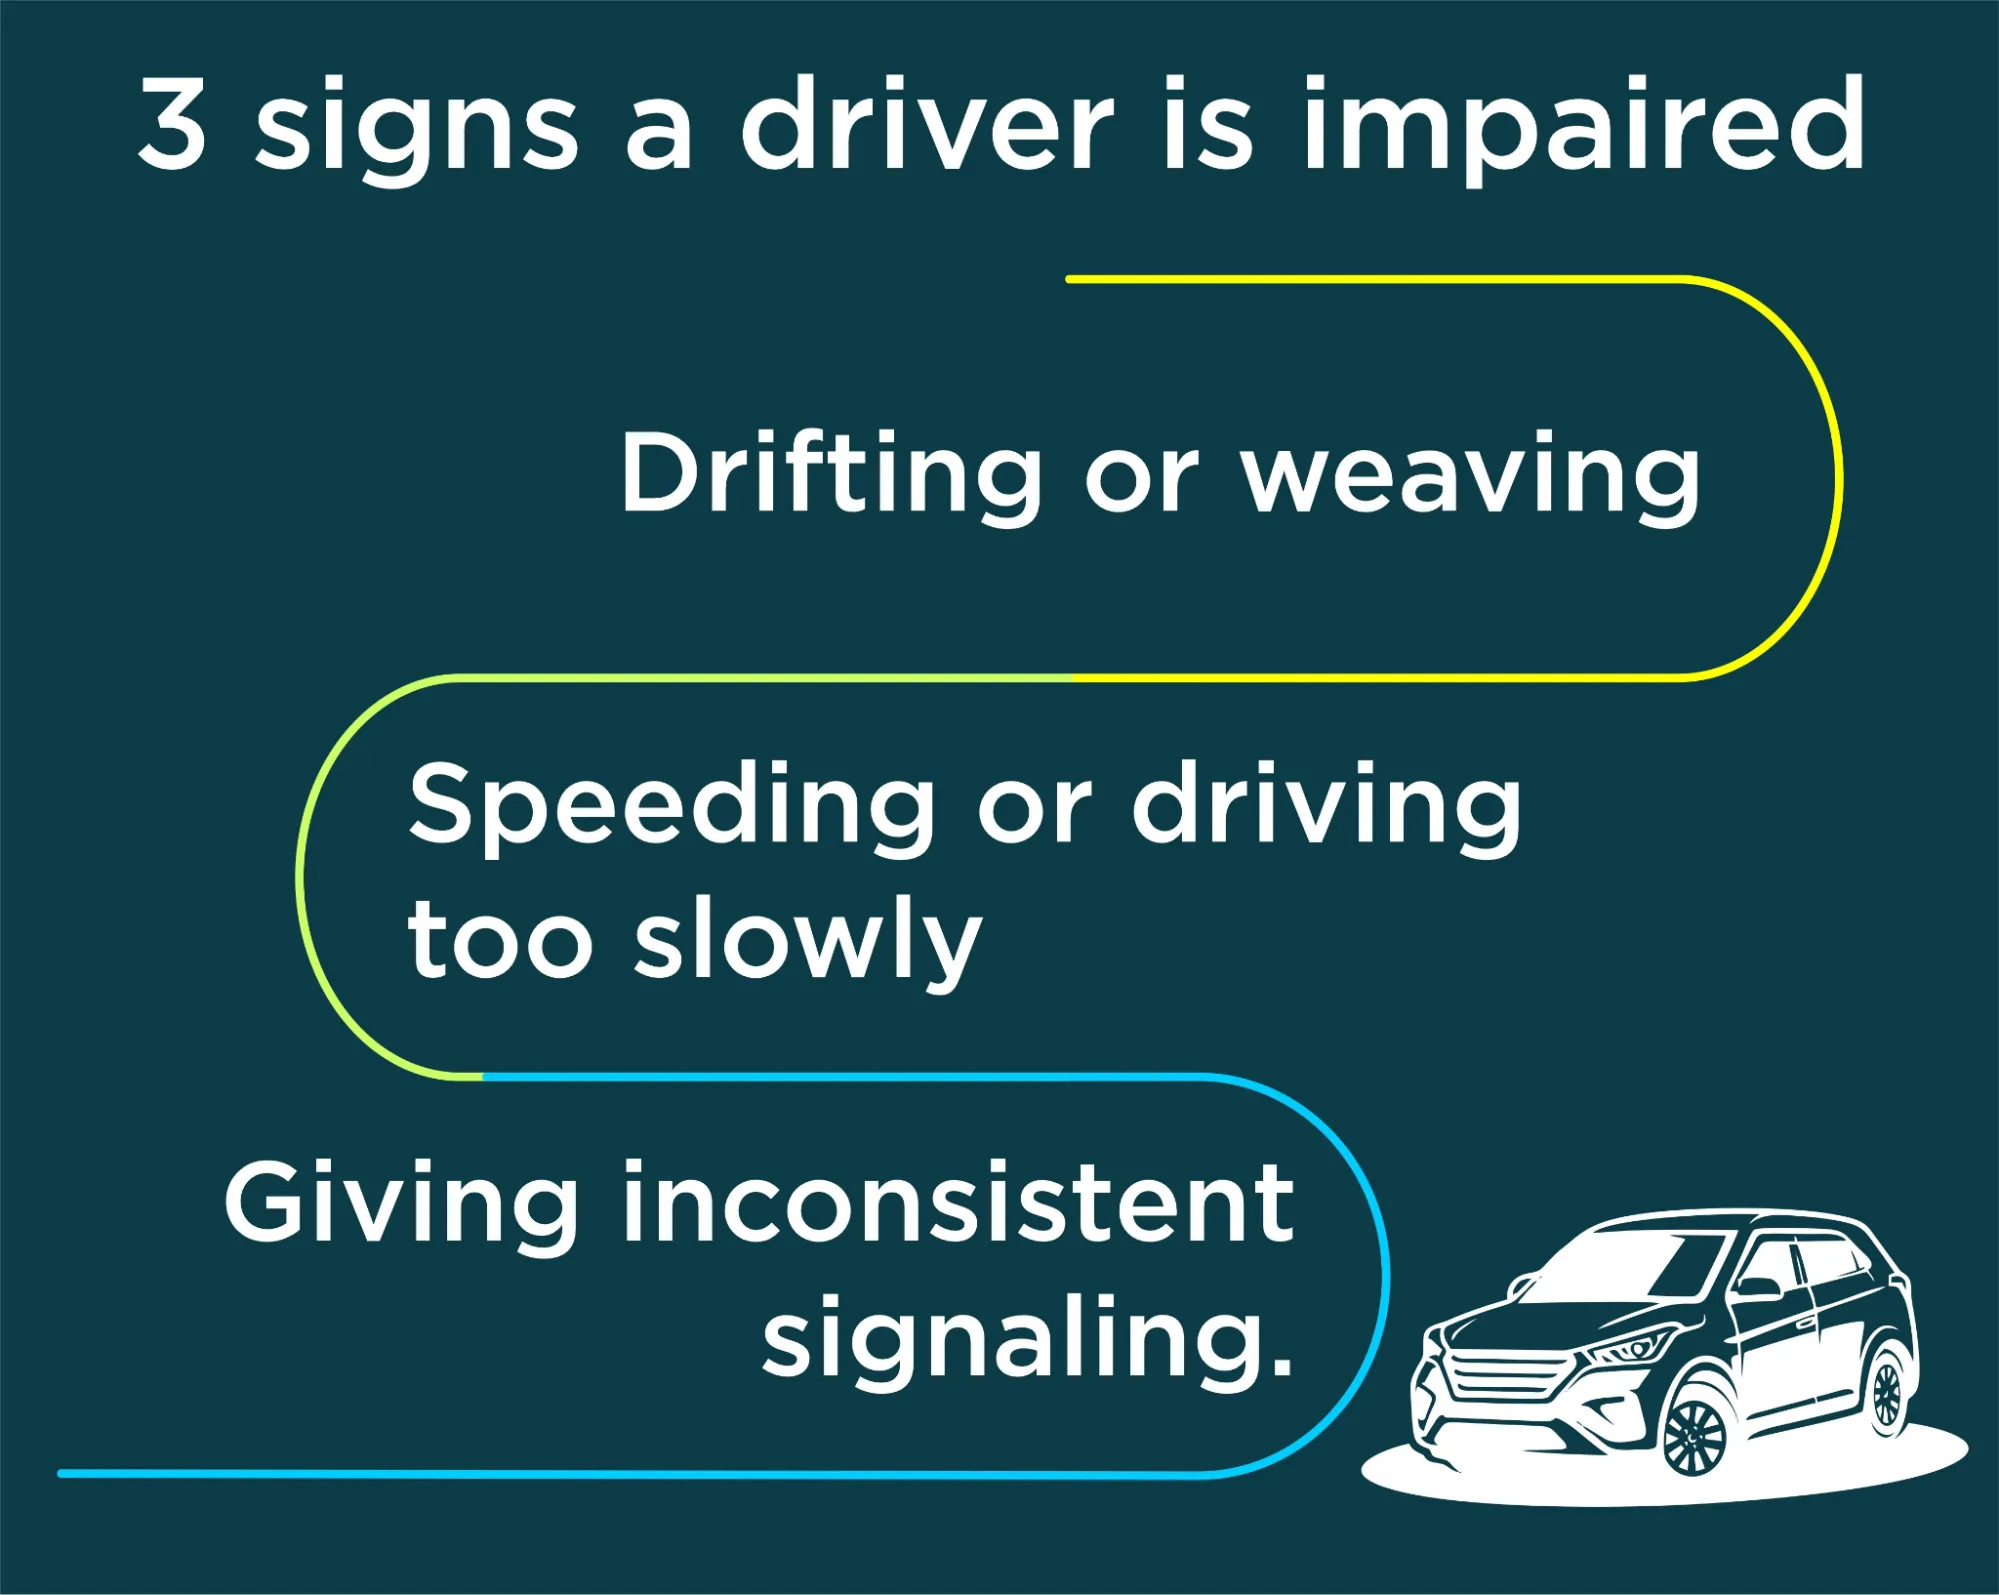 3 sign a driver is impaired